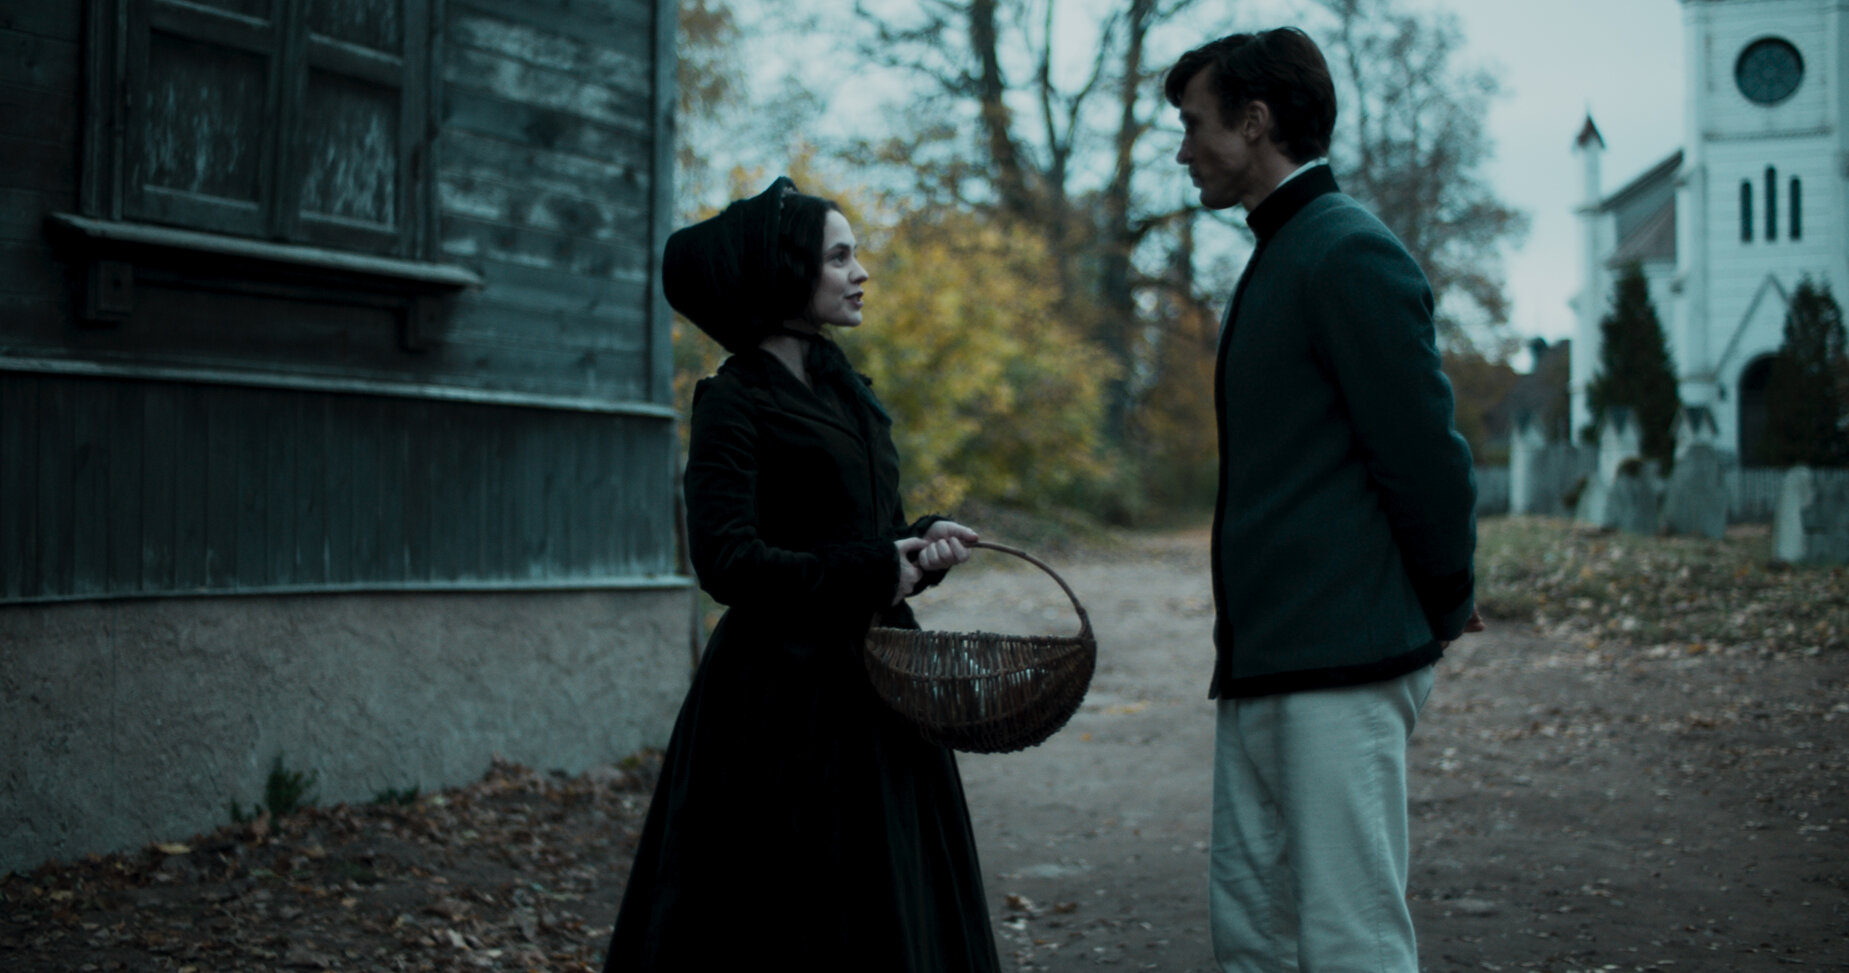 Raven’s Hollow is a Fittingly Chilly Autumnal Horror Story [Review] – Wicked Horror